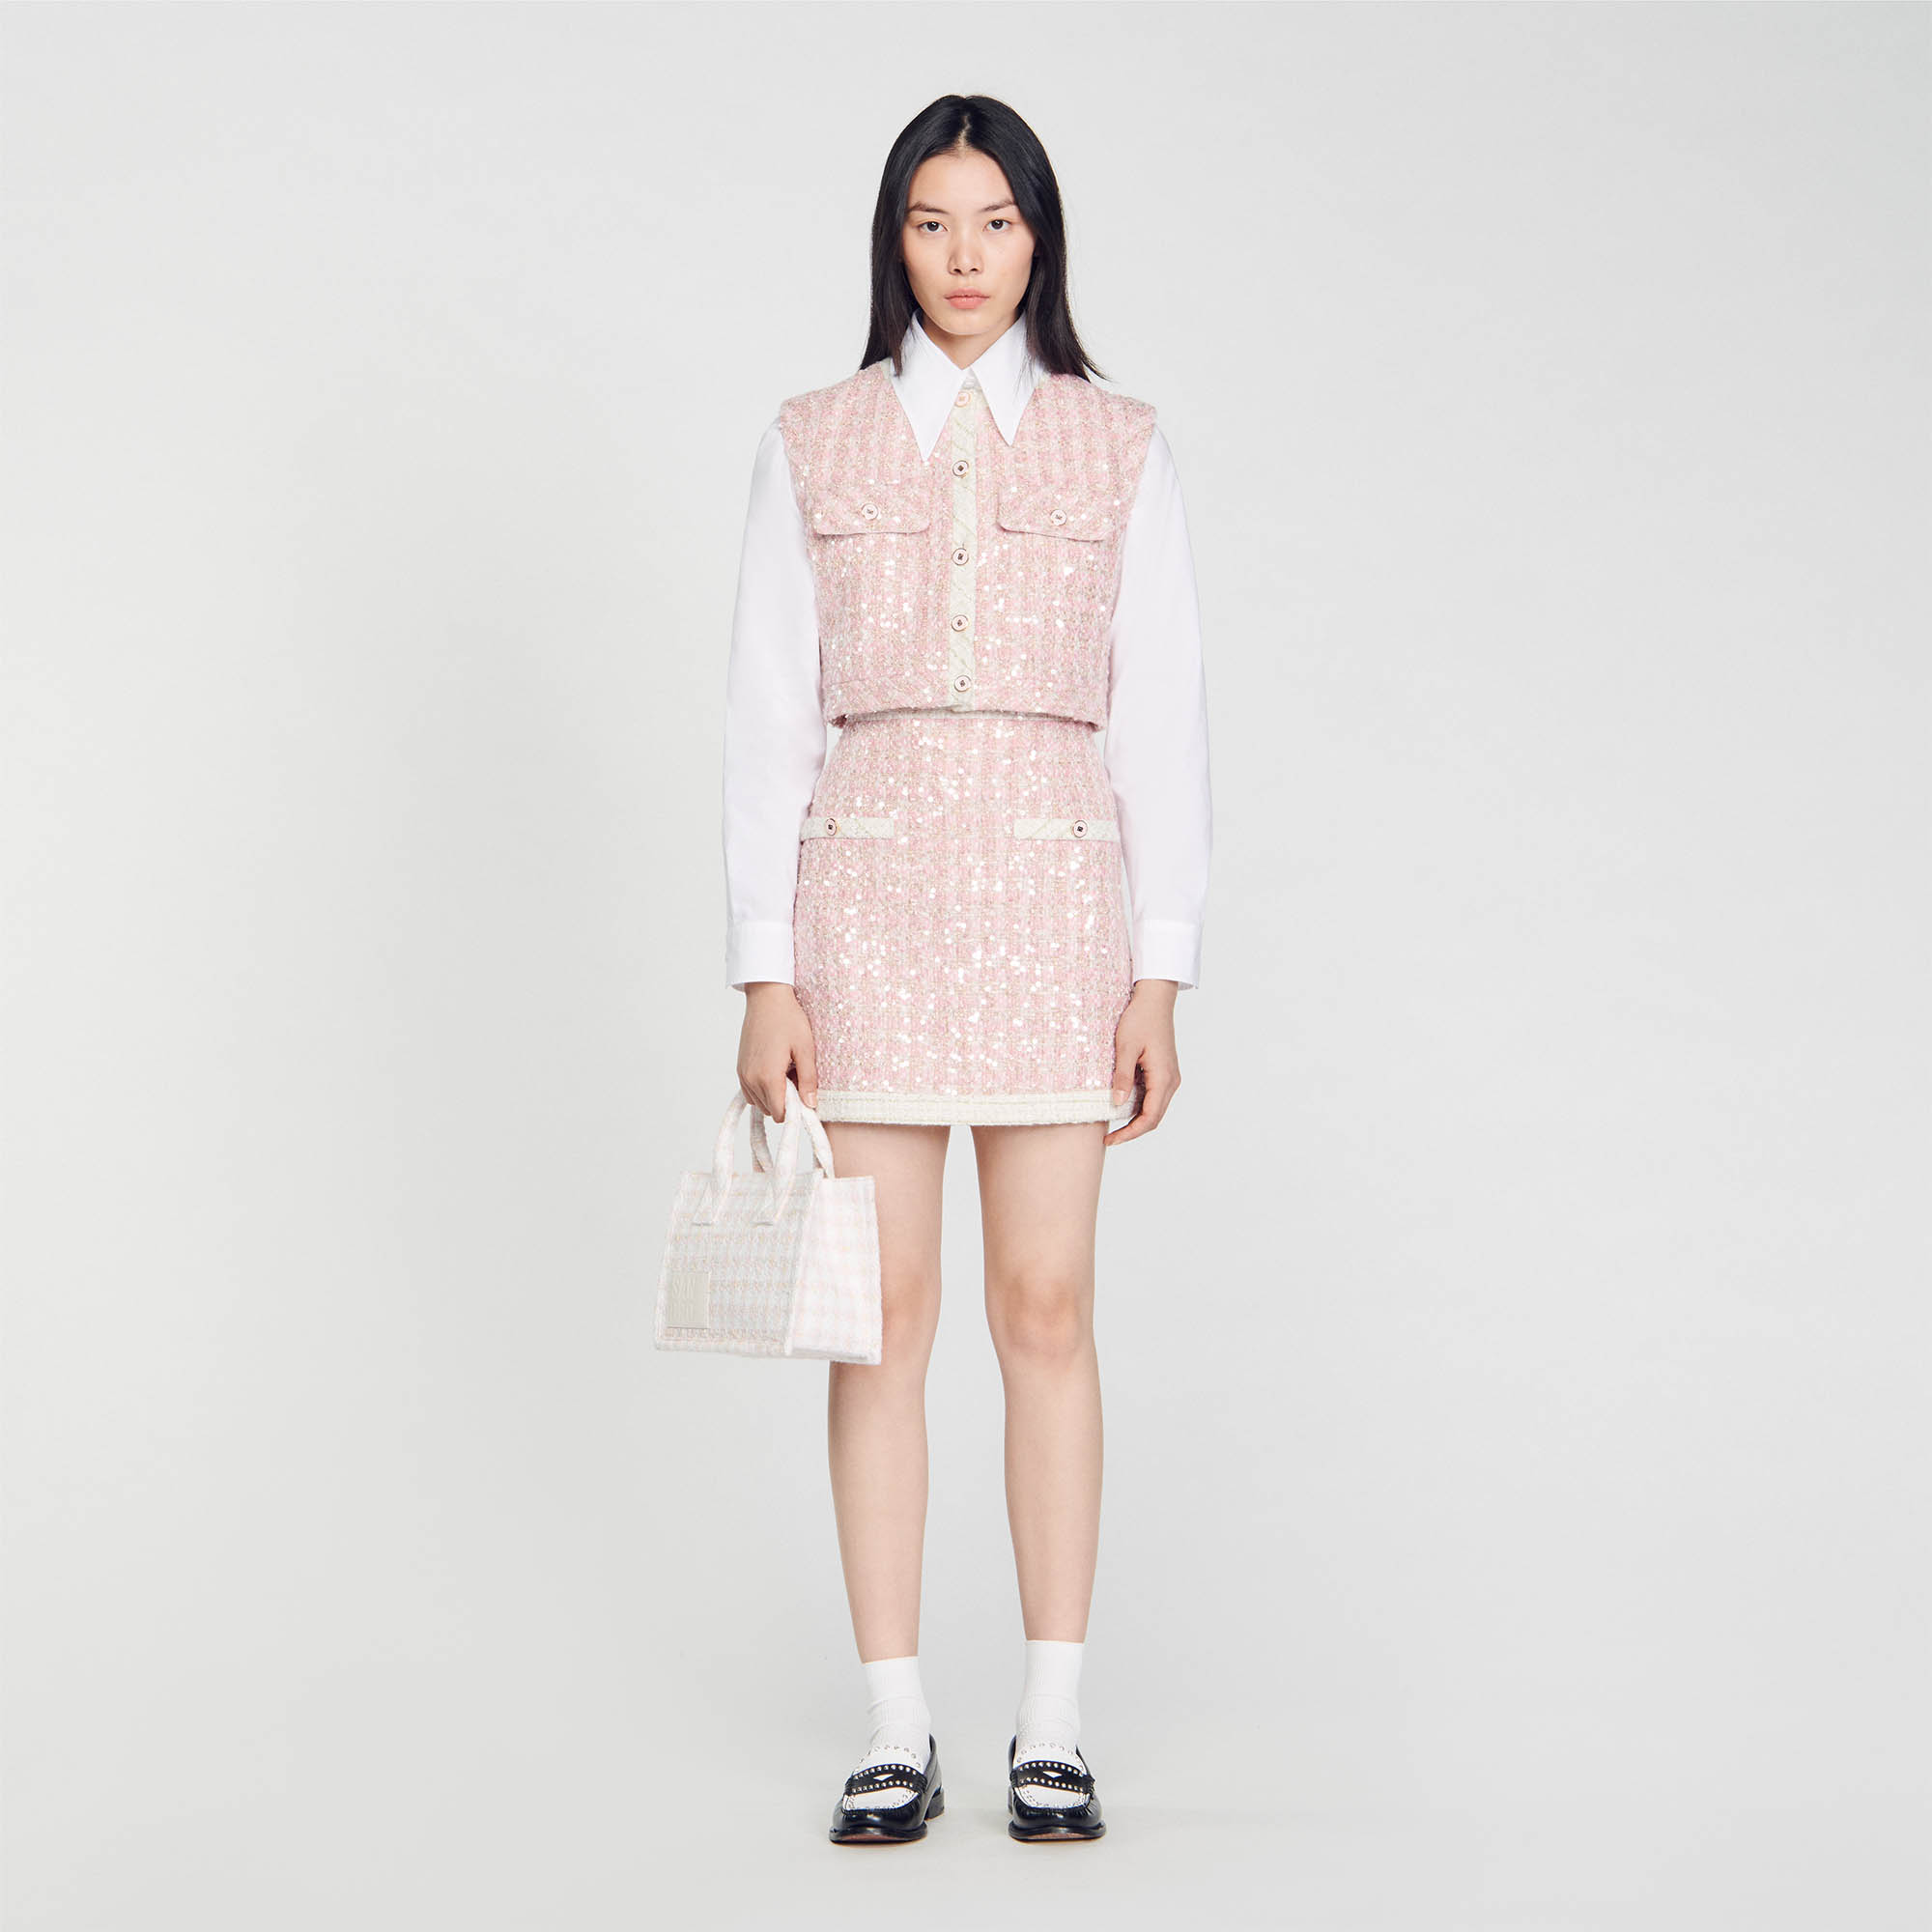 Sandro polyester Lining: Short tweed skirt in a mix of decorative tweeds with metallic fibres